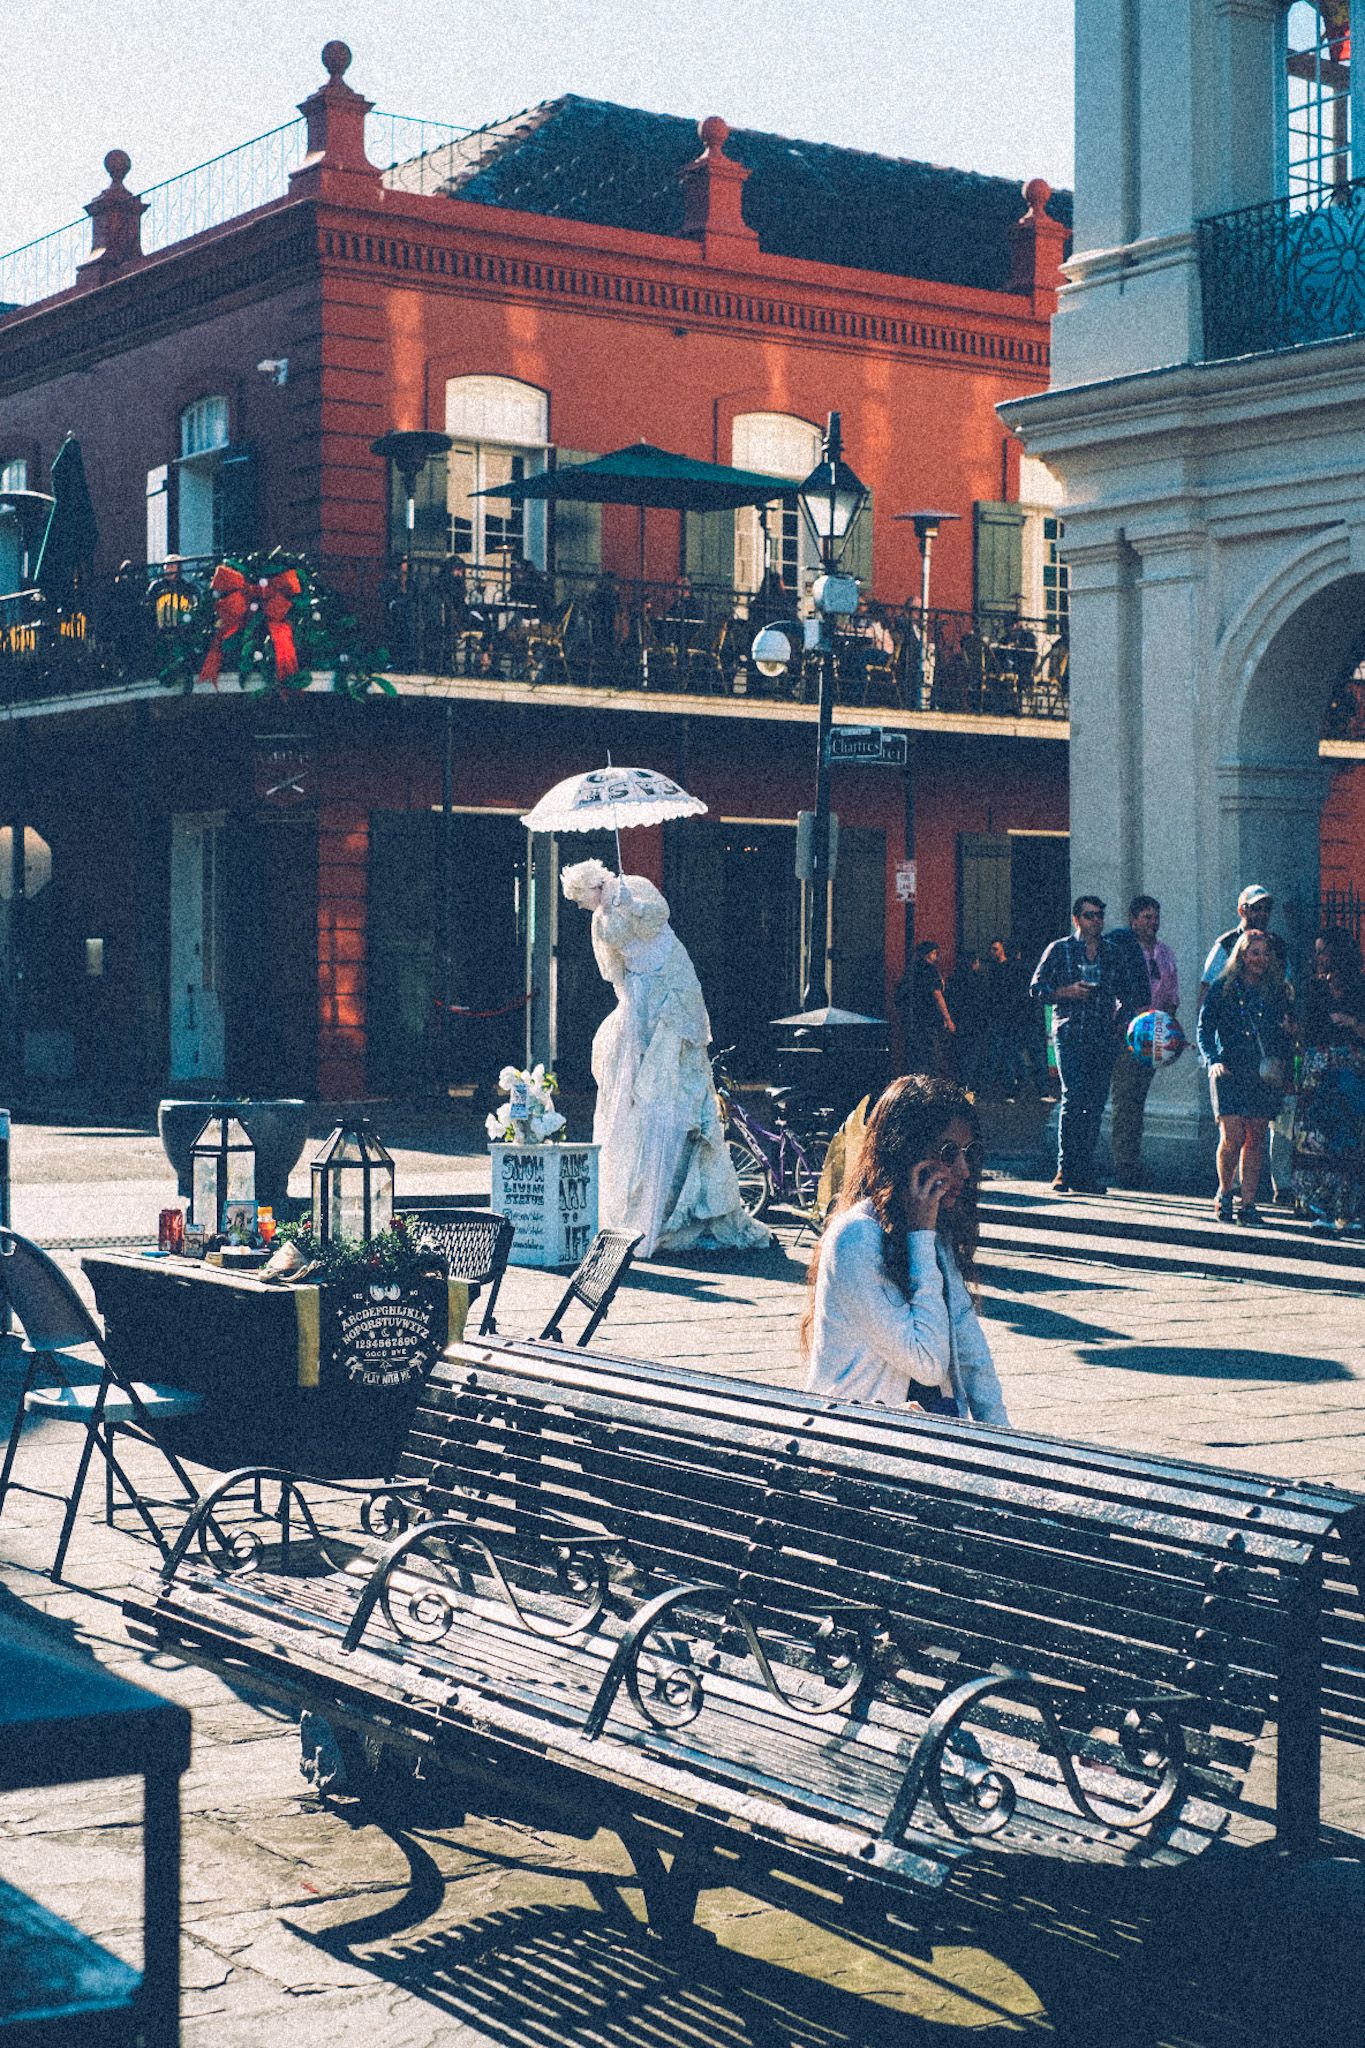 A woman posing as a tall Victorian statue covered in white paint stands in the background, among red brick buildings in the French quarter.